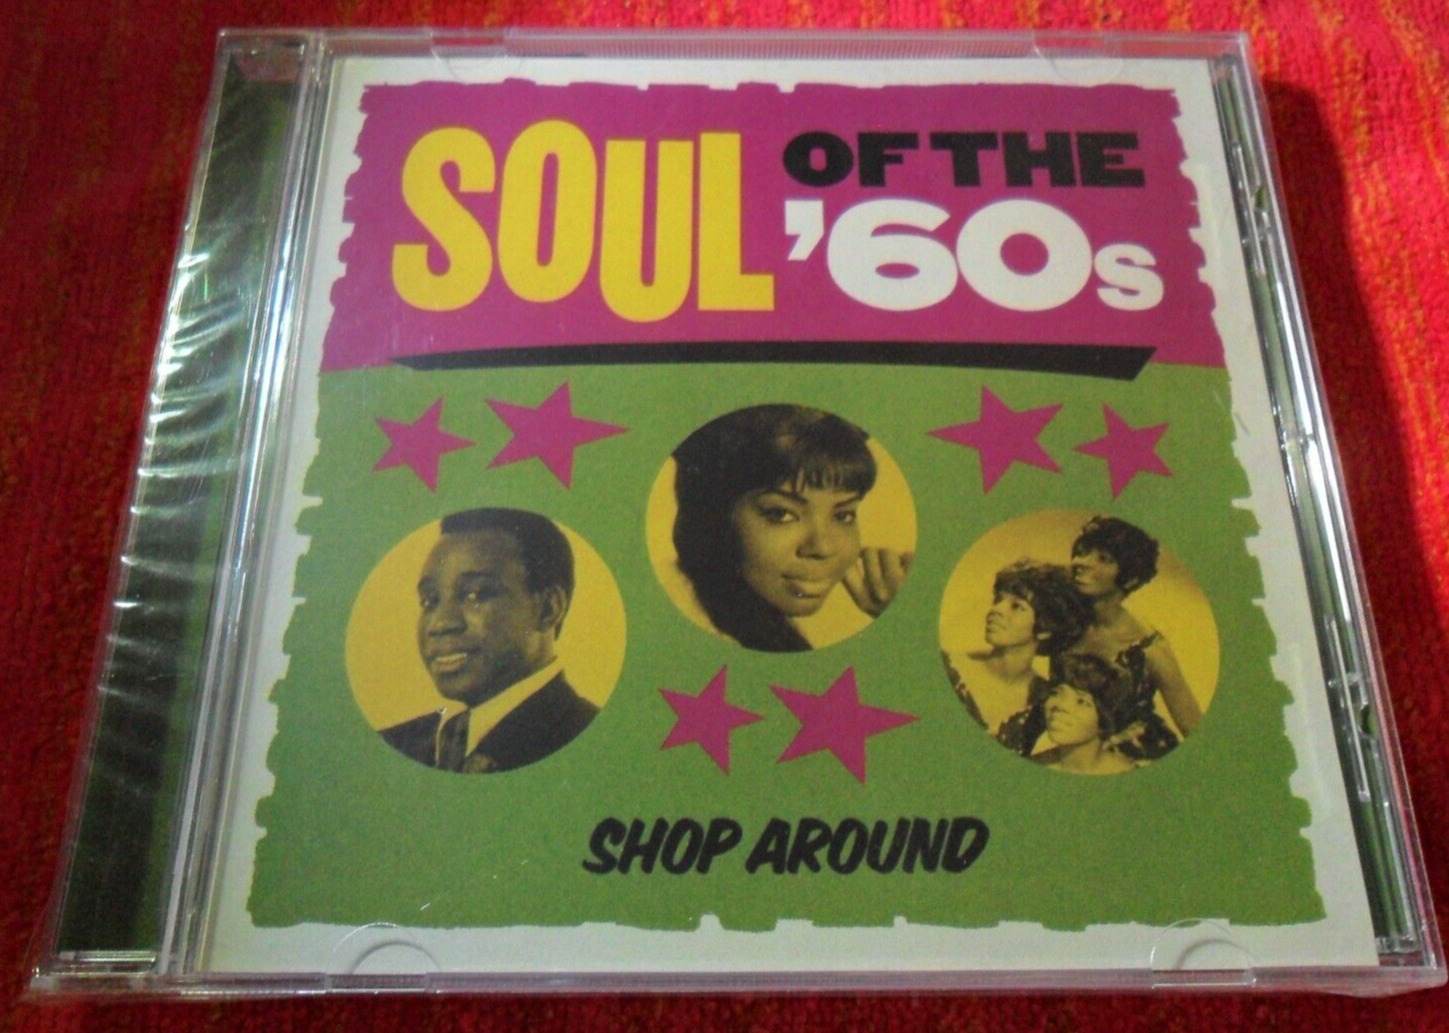 2014 SOUL OF THE 60'S SHOP AROUND CD TIME LIFE ( SEALED ) MINT+